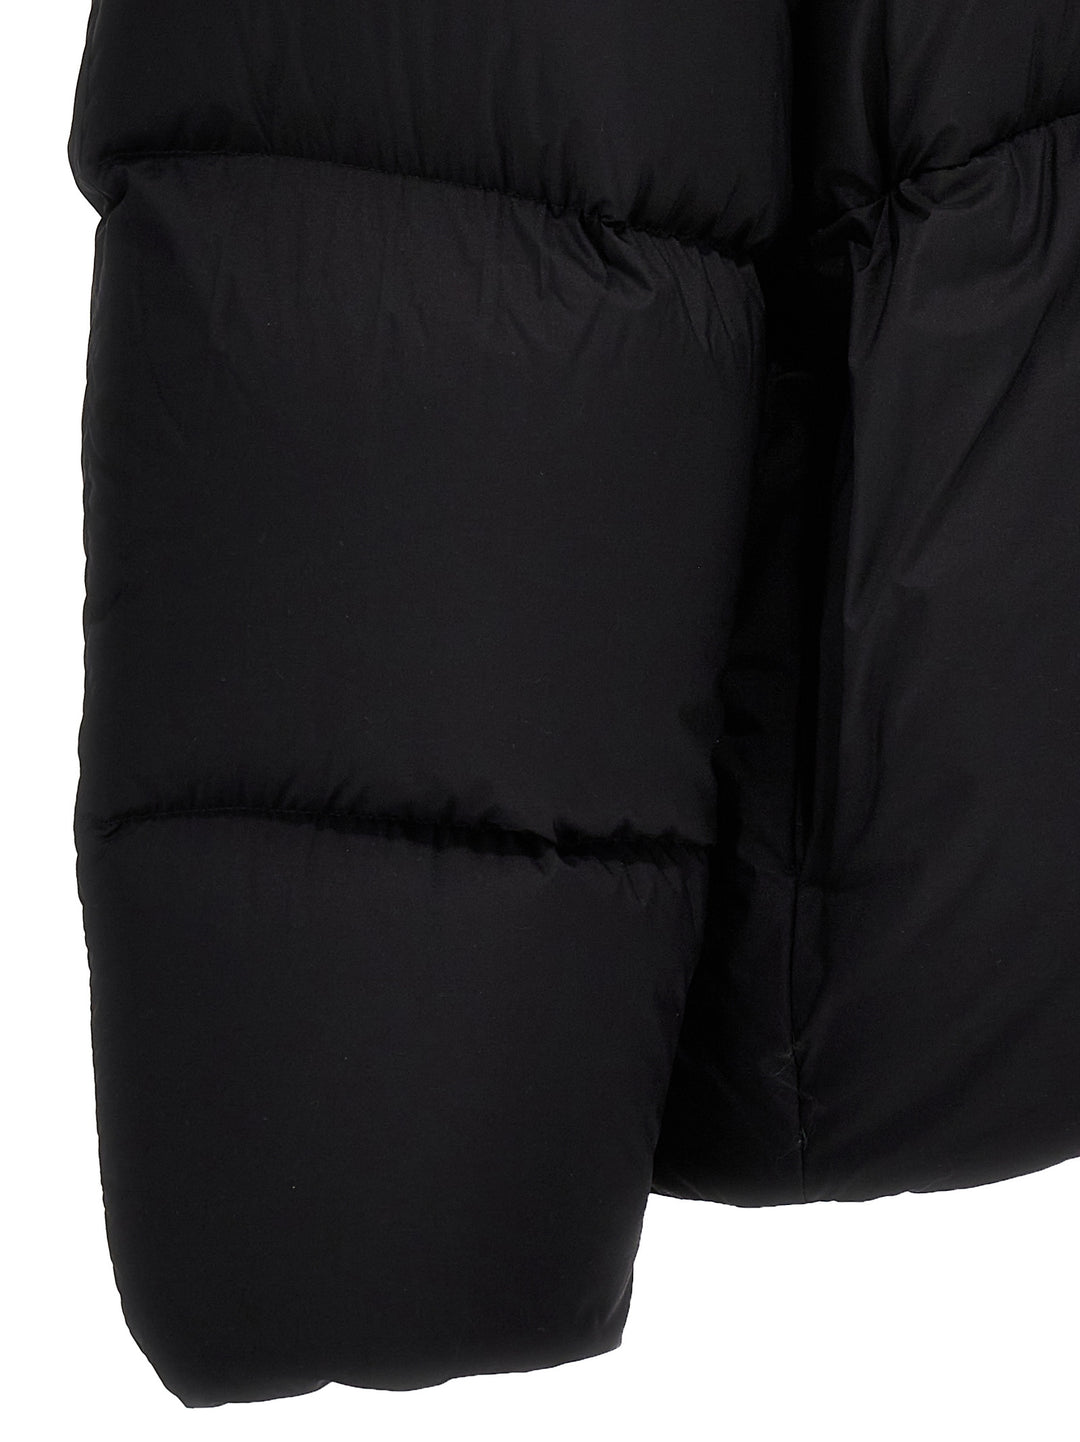 Moncler Genius Roc Nation By Jay-Z Down Jacket Giacche Nero